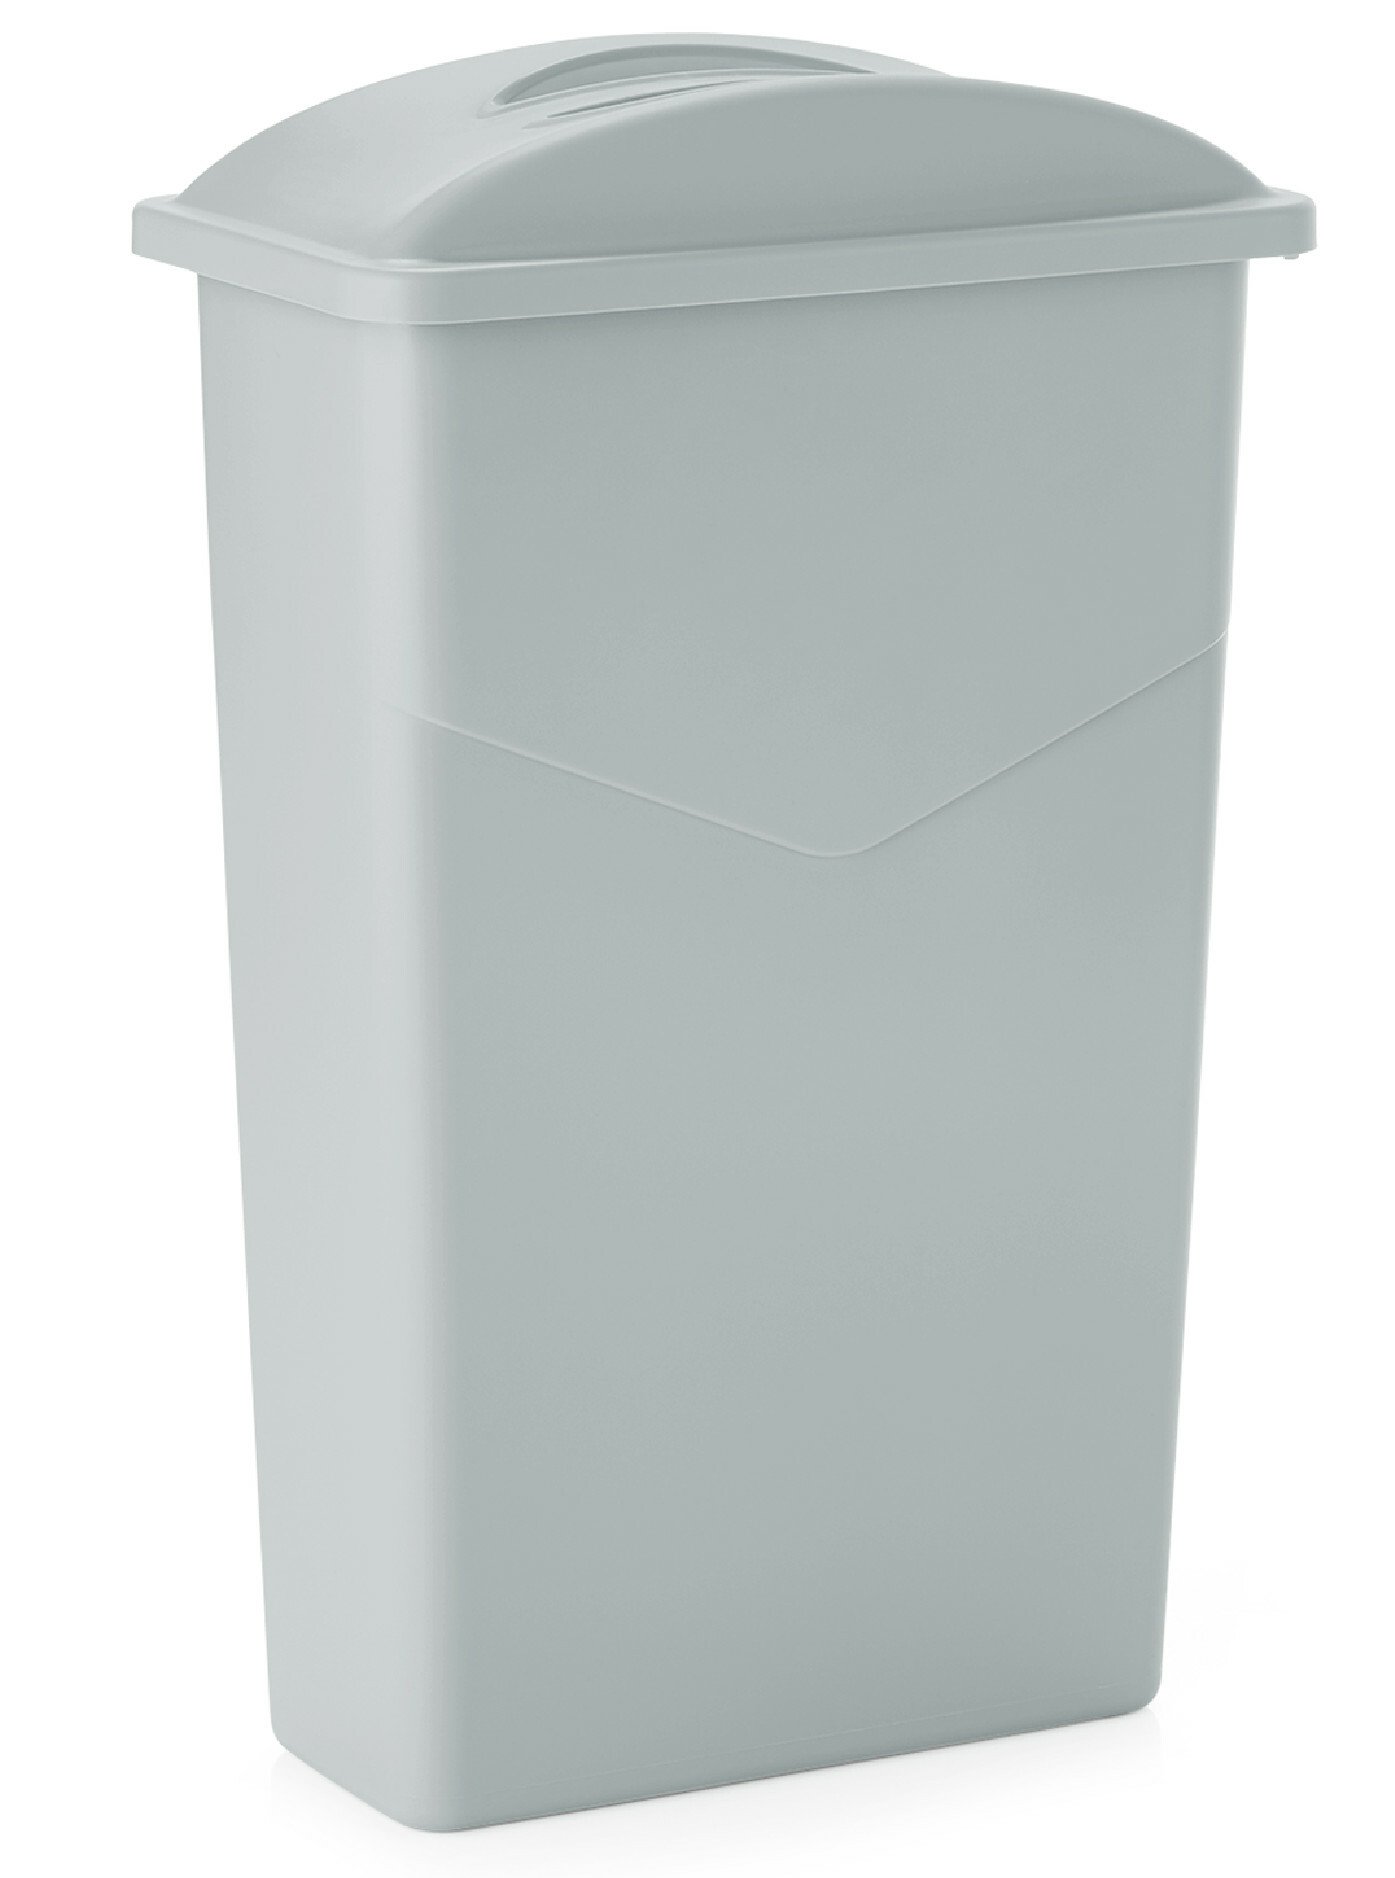 75l garbage container with removable lid